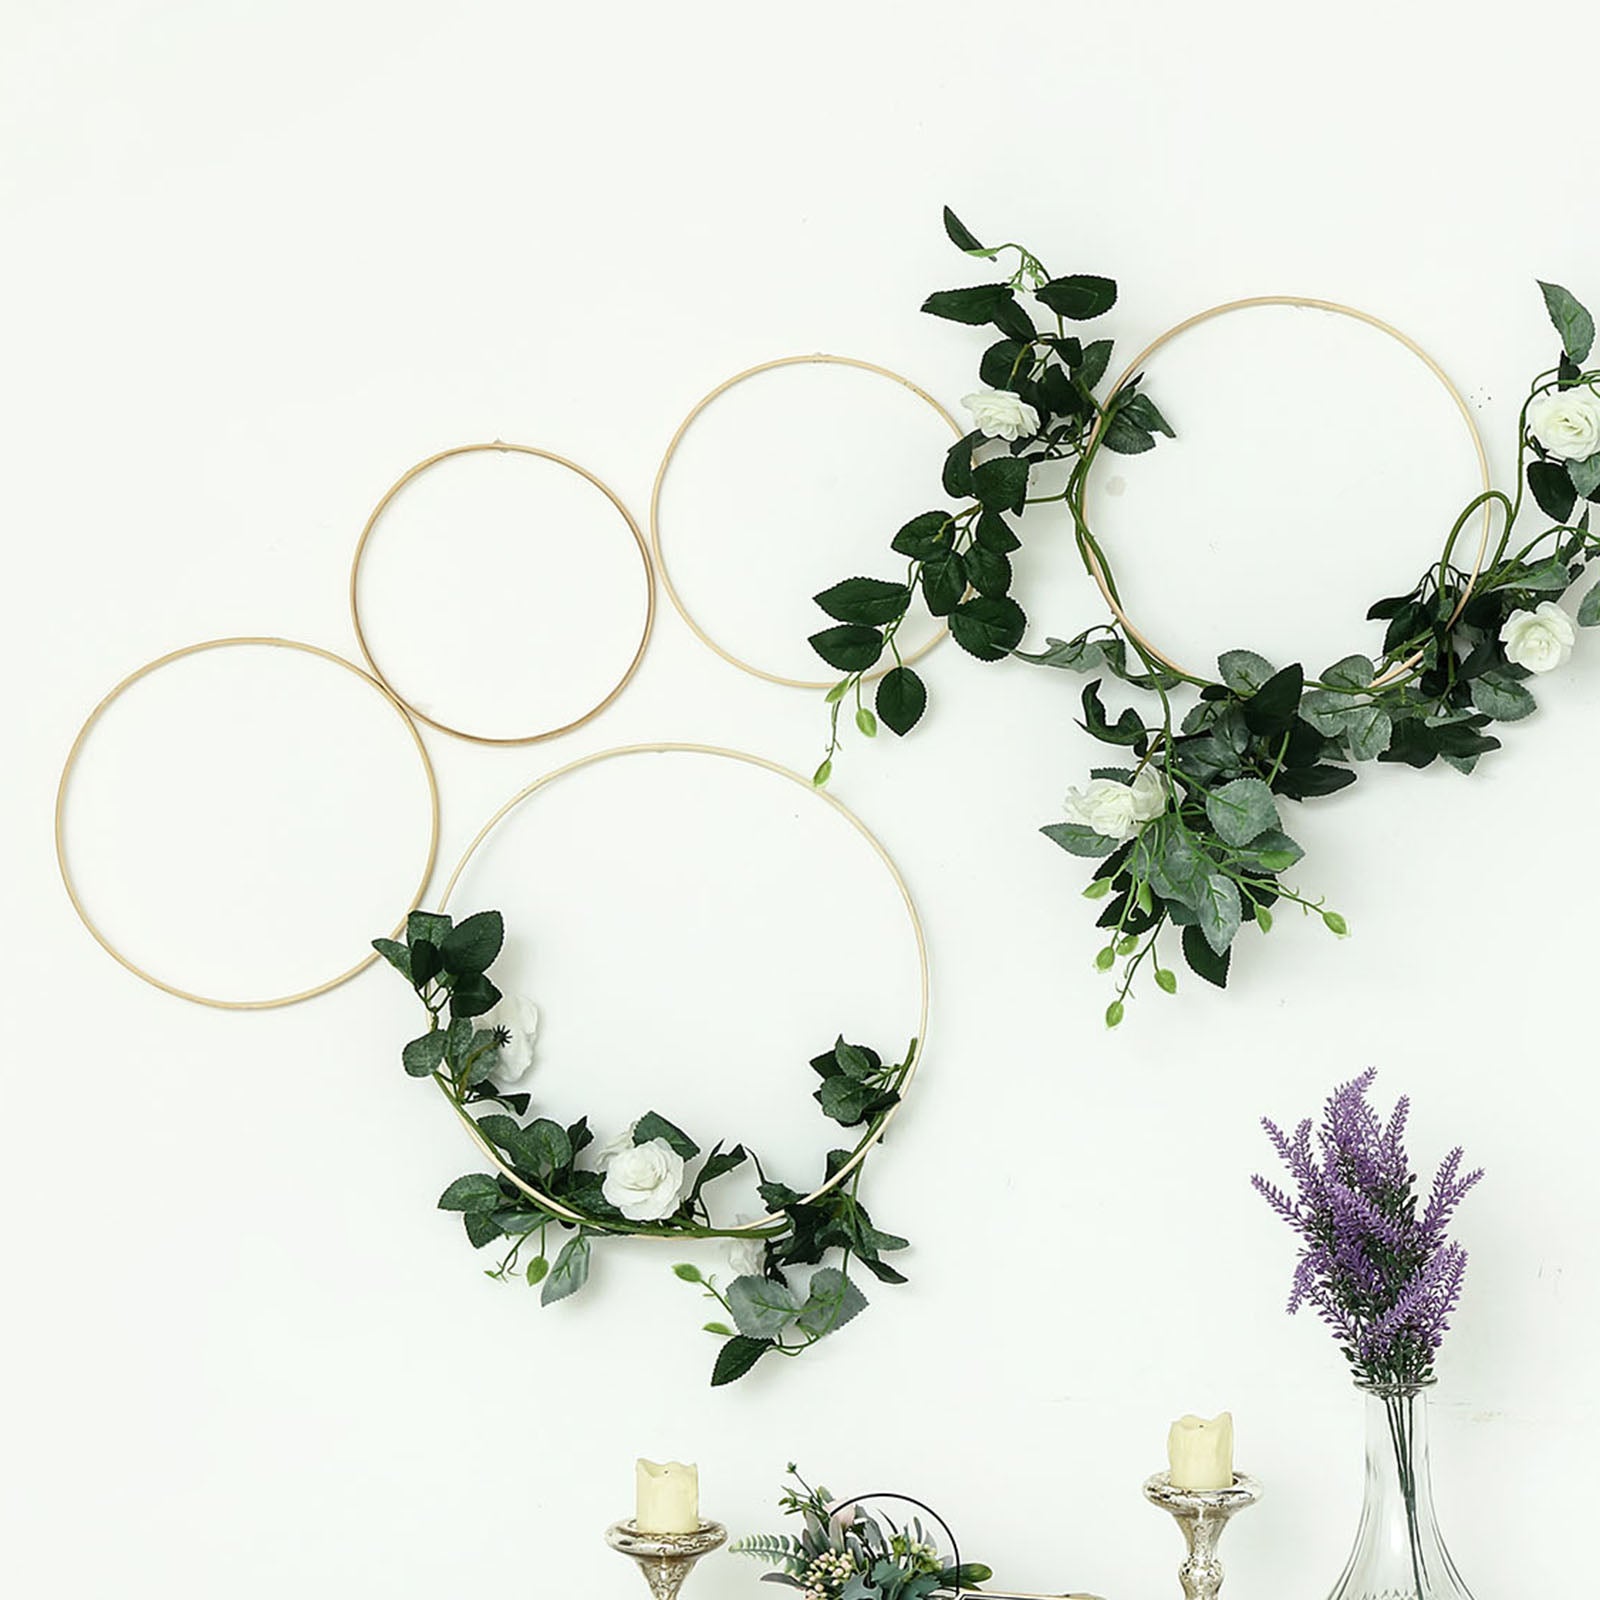 Natural Wooden Rings: Crafts & Floral Wall Decor